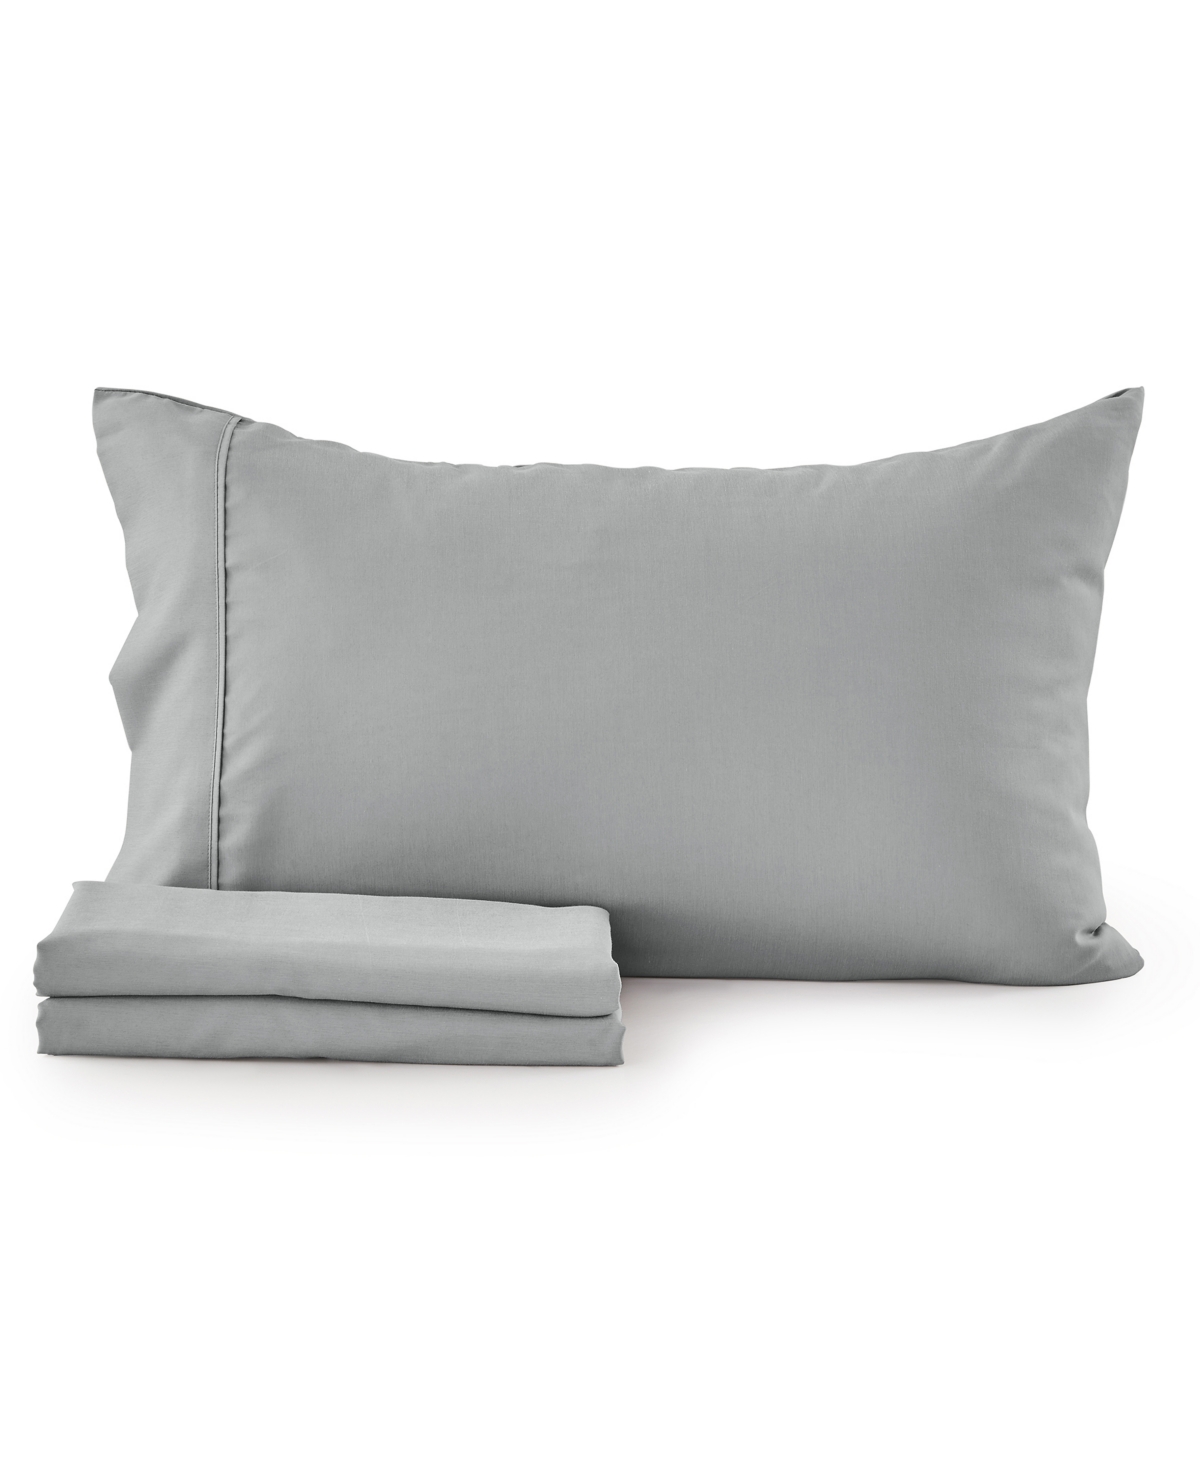 Premium Comforts Rayon From Bamboo Blend Crease-resistant 4 Piece Sheet Set, Full In Slate